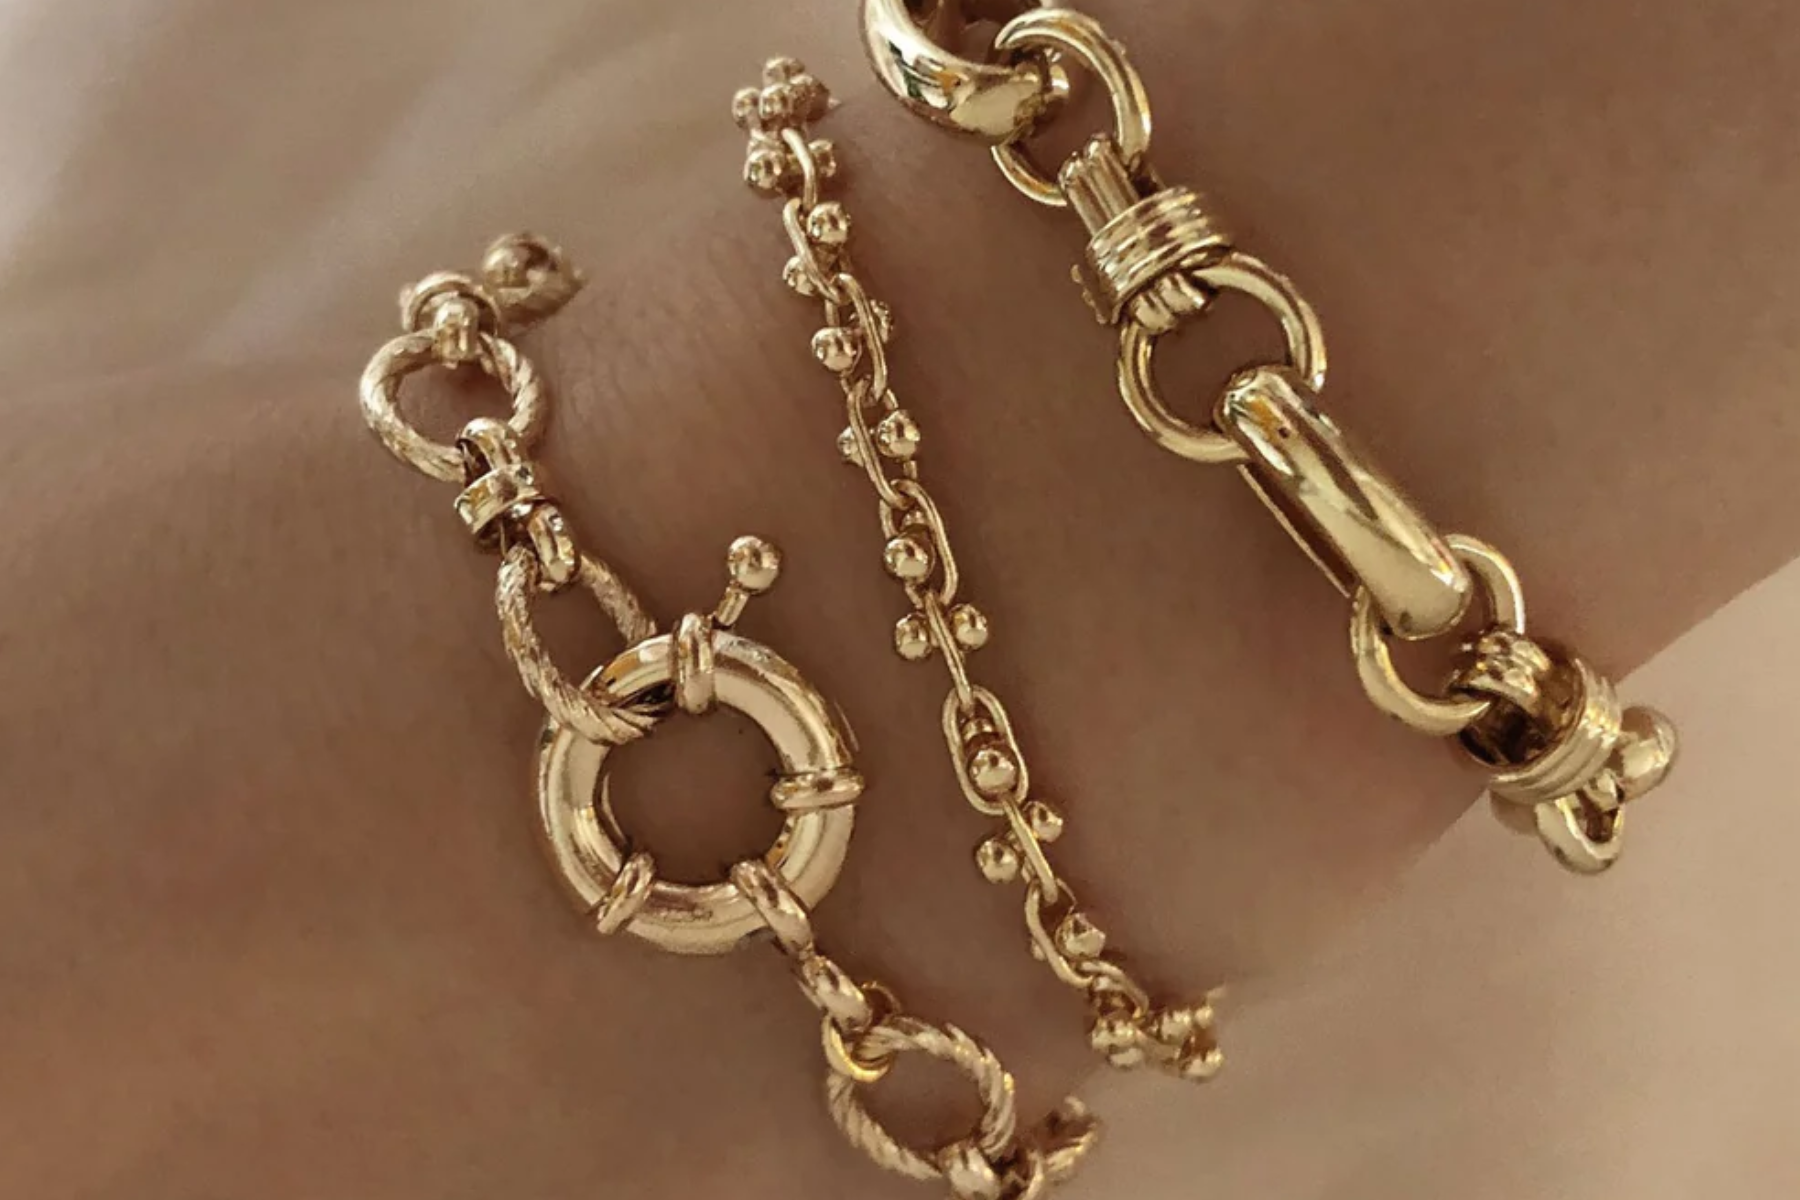 An individual's wrist is adorned with three gold chunky bracelets